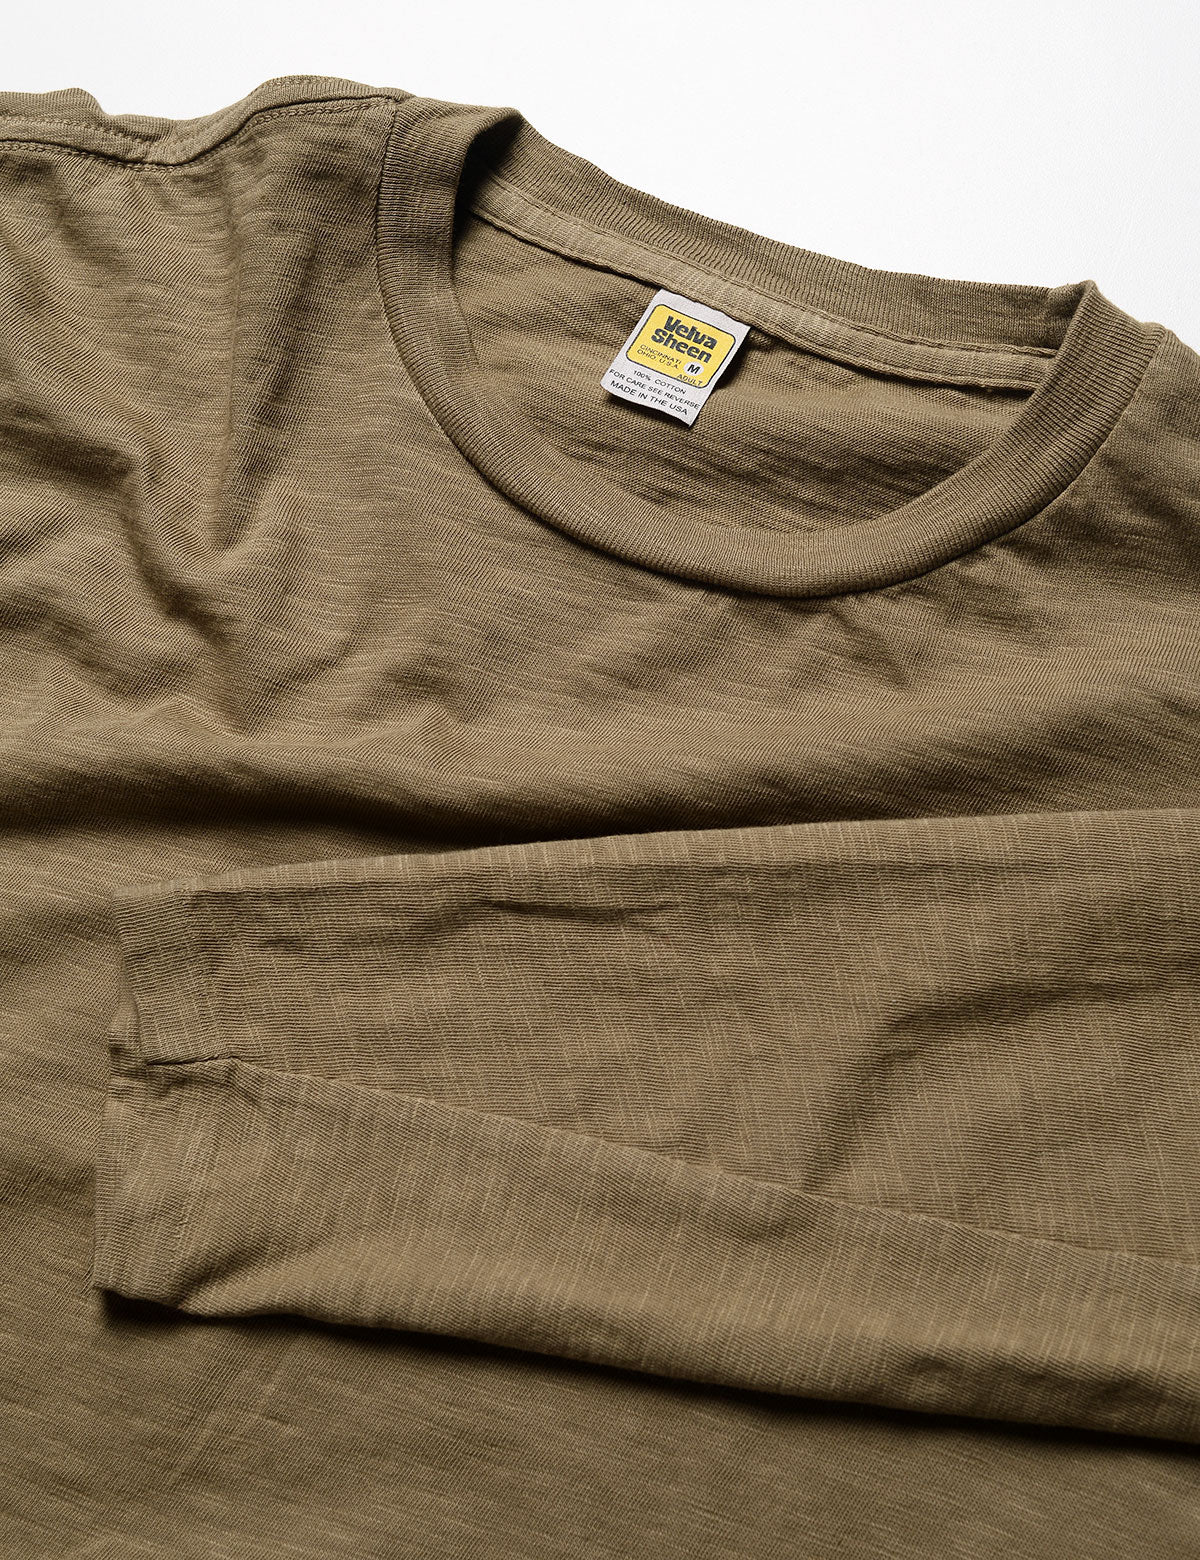 Long Sleeve Crewneck T-Shirt in Olive